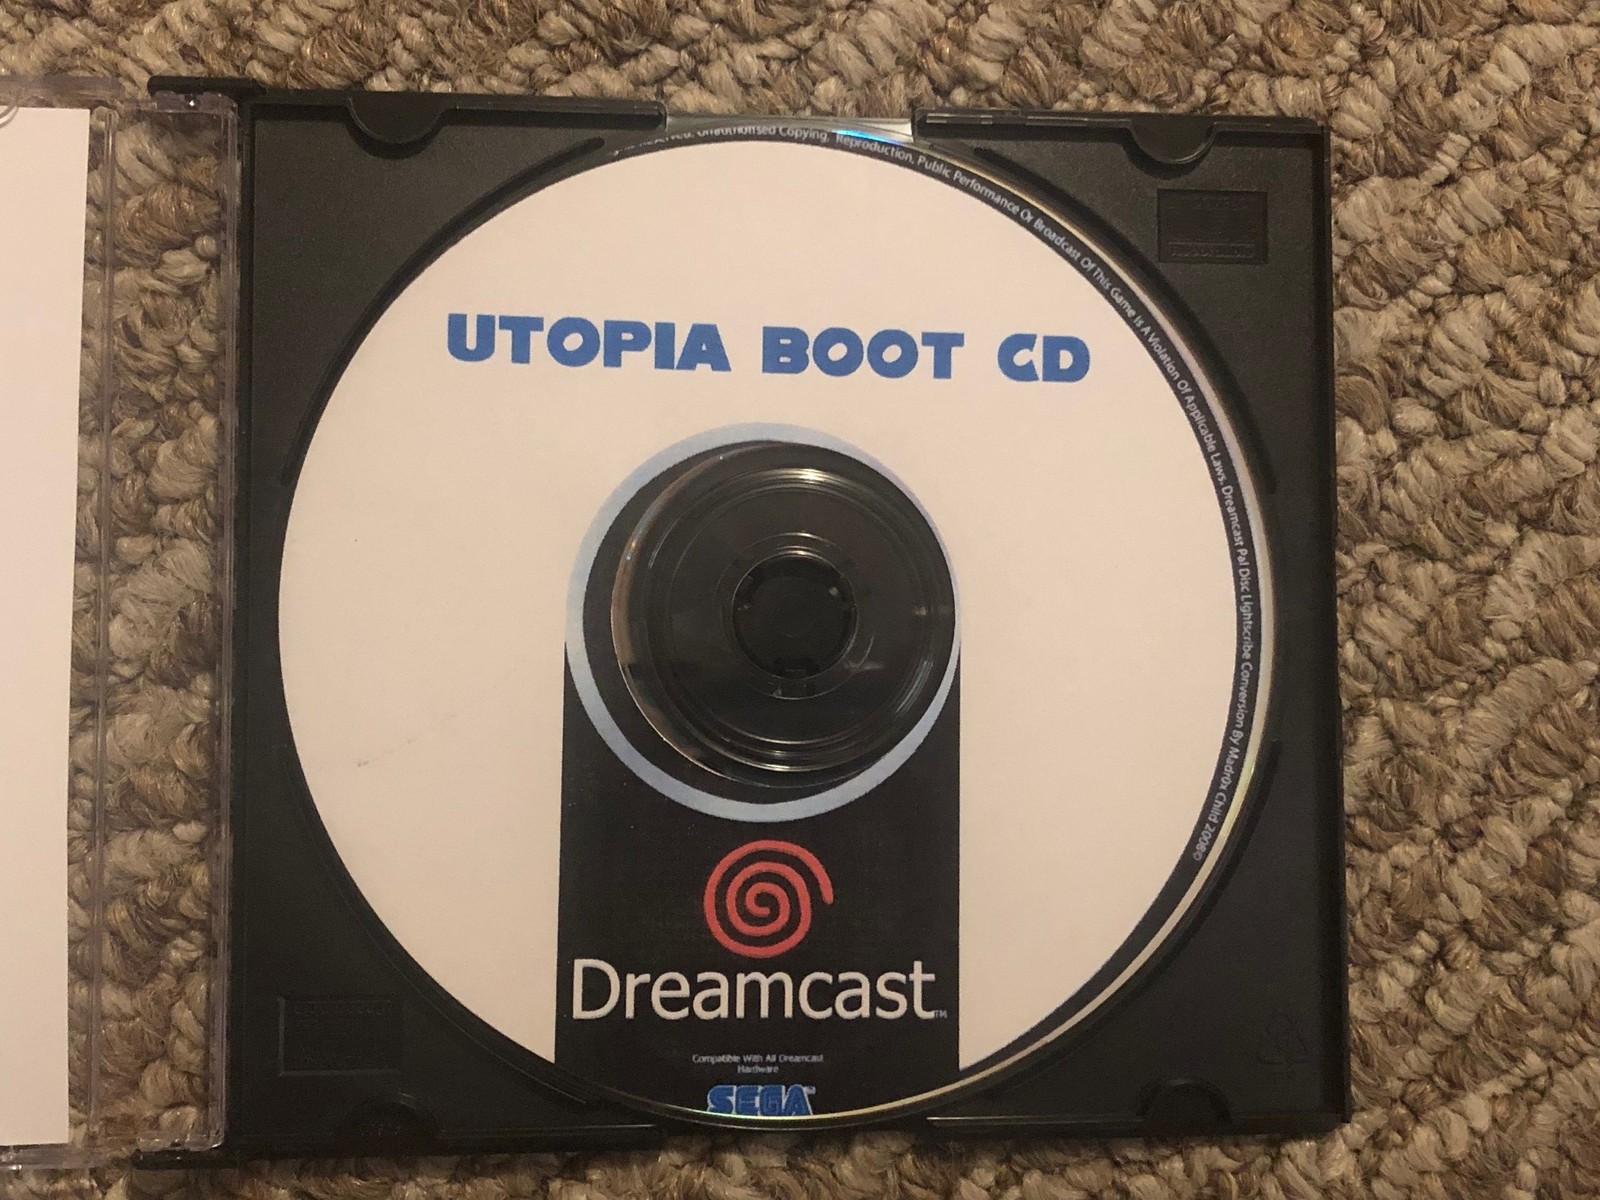 utopia boot disc for dreamcast